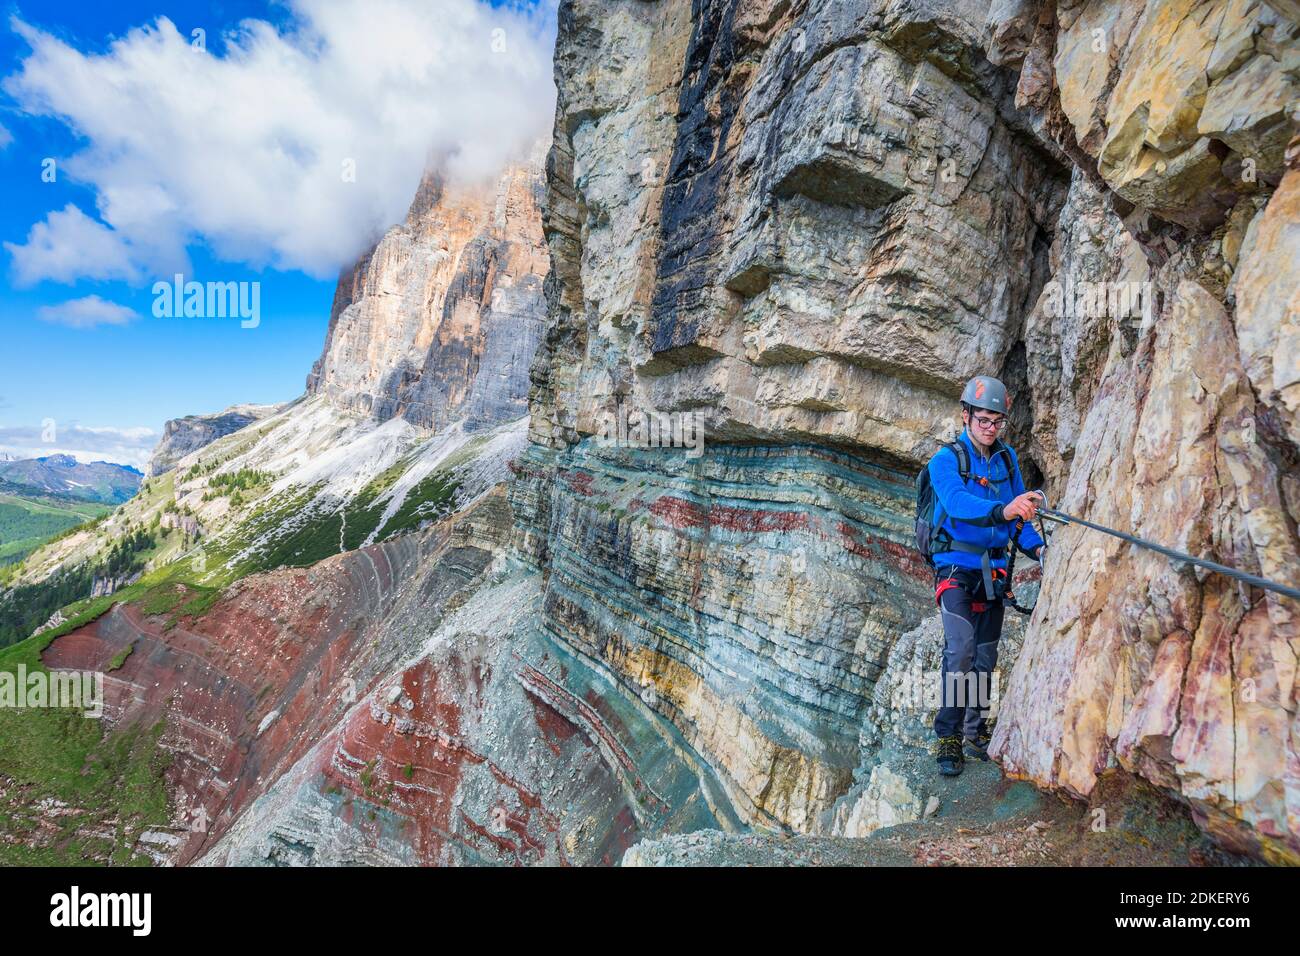 young man 22 years old along the equipped path Astaldi (characteristic for colored rocks) at the foots of Tofane, Cortina d'Ampezzo, Dolomites, Belluno, Veneto, Italy Stock Photo